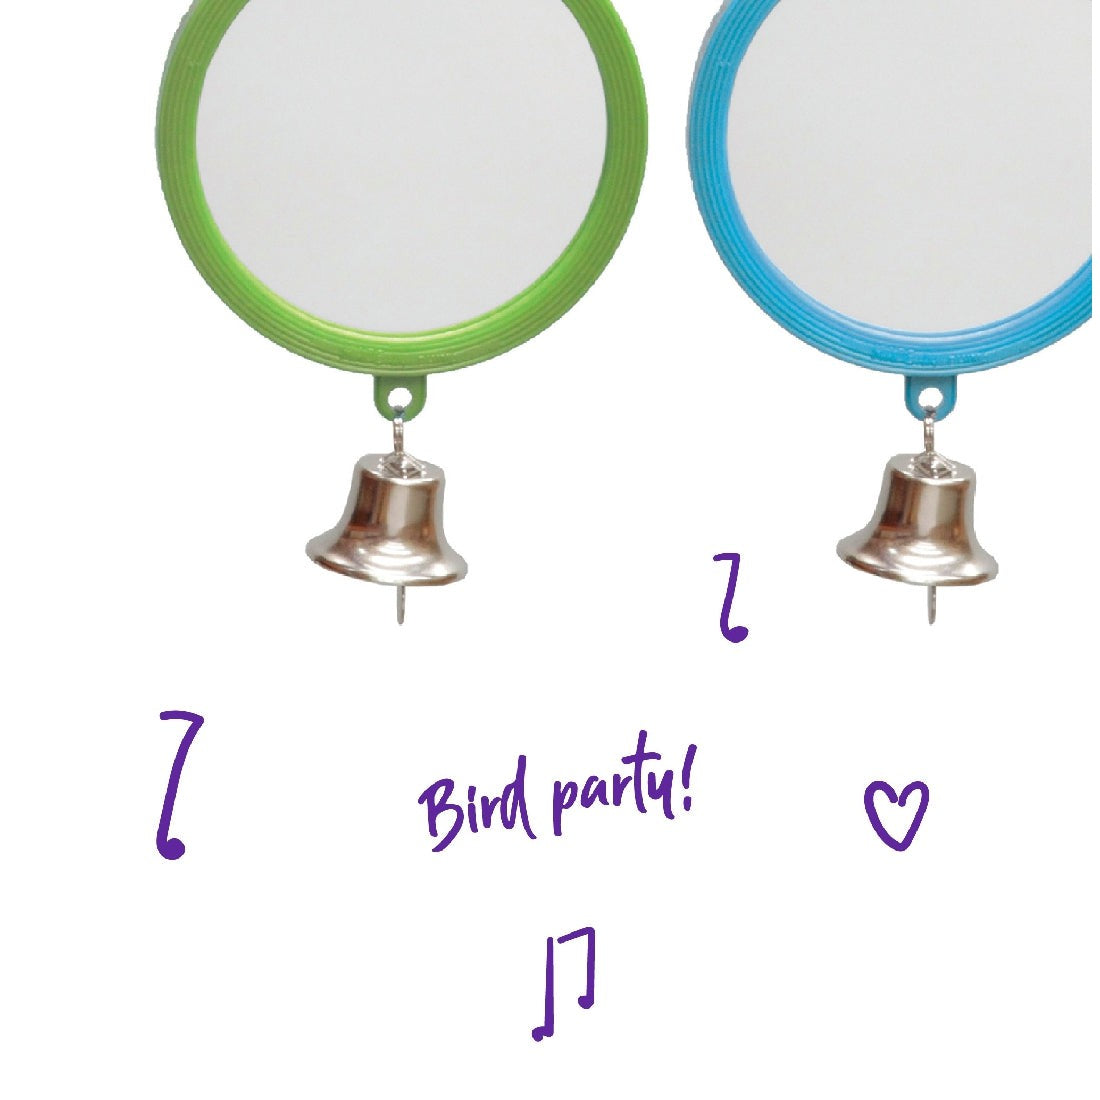 Two circular mirrors with bells, bird toy, on white background.